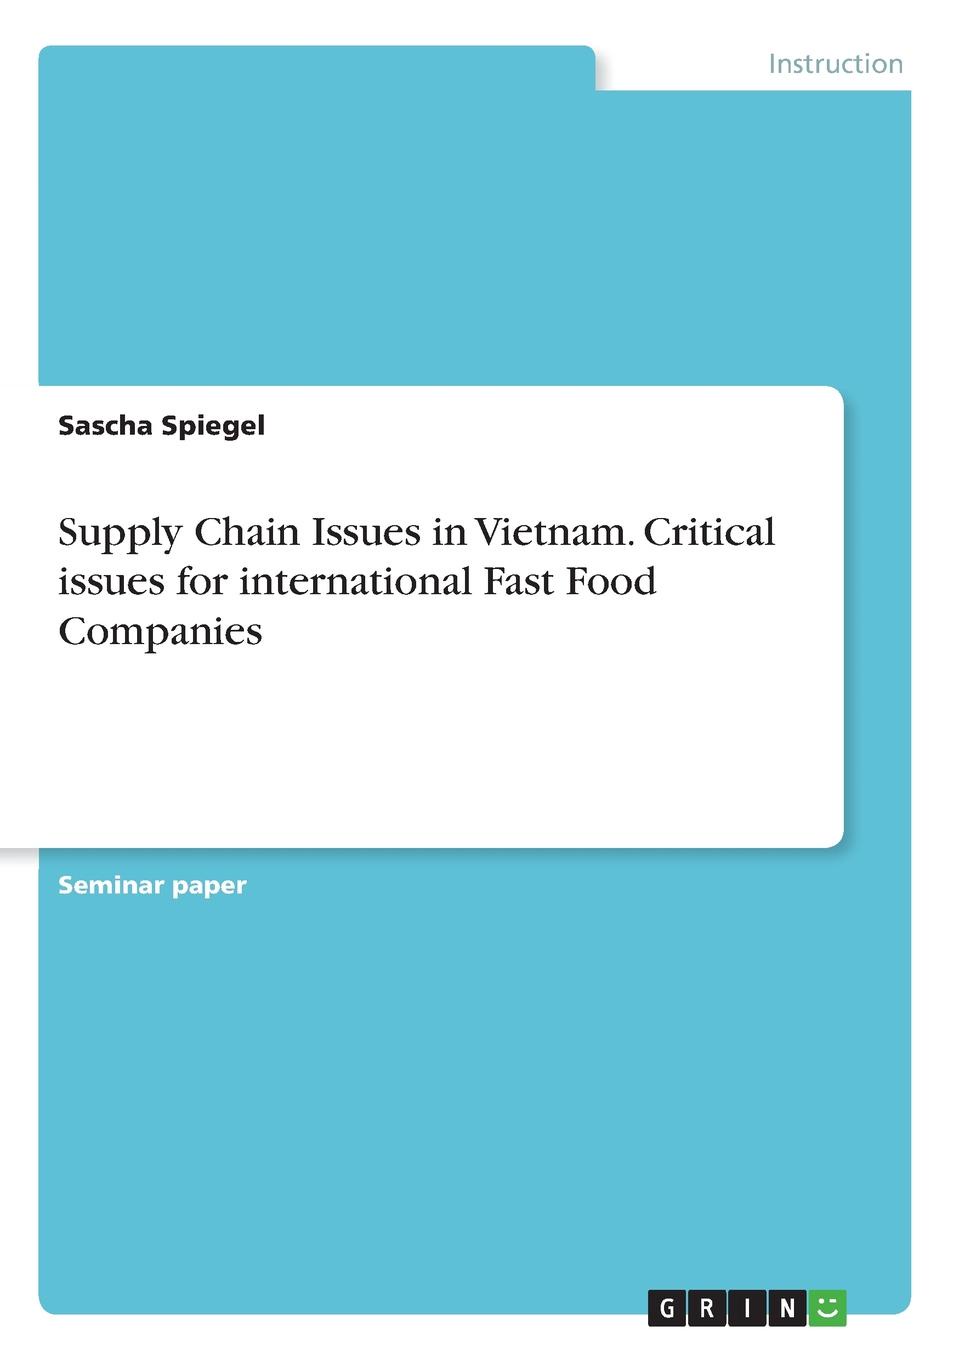 Sascha Spiegel Supply Chain Issues in Vietnam. Critical issues for international Fast Food Companies